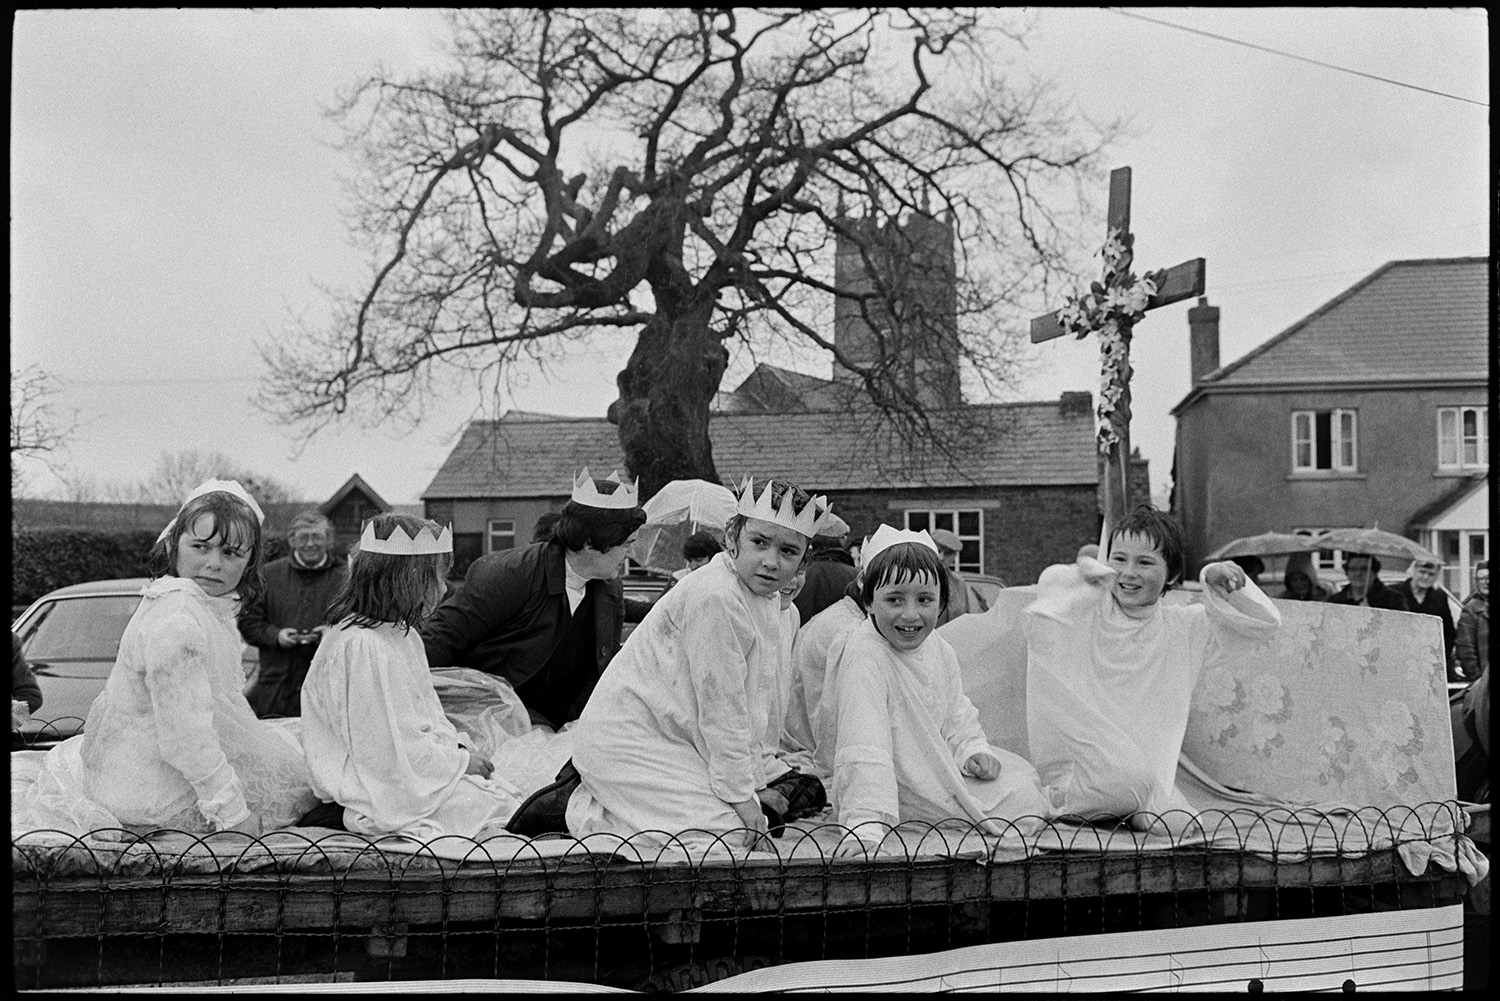 Carnival procession with Queen on decorated float, rain, spectators and fancy dress. 
[Children on a carnival float at Shebbear Carnival in fancy dress. Some of the children are wearing crowns and a cross with flowers is at the front of the float. Spectators are watching the procession in the rain with umbrellas. Shebbear church tower can be seen in the background.]